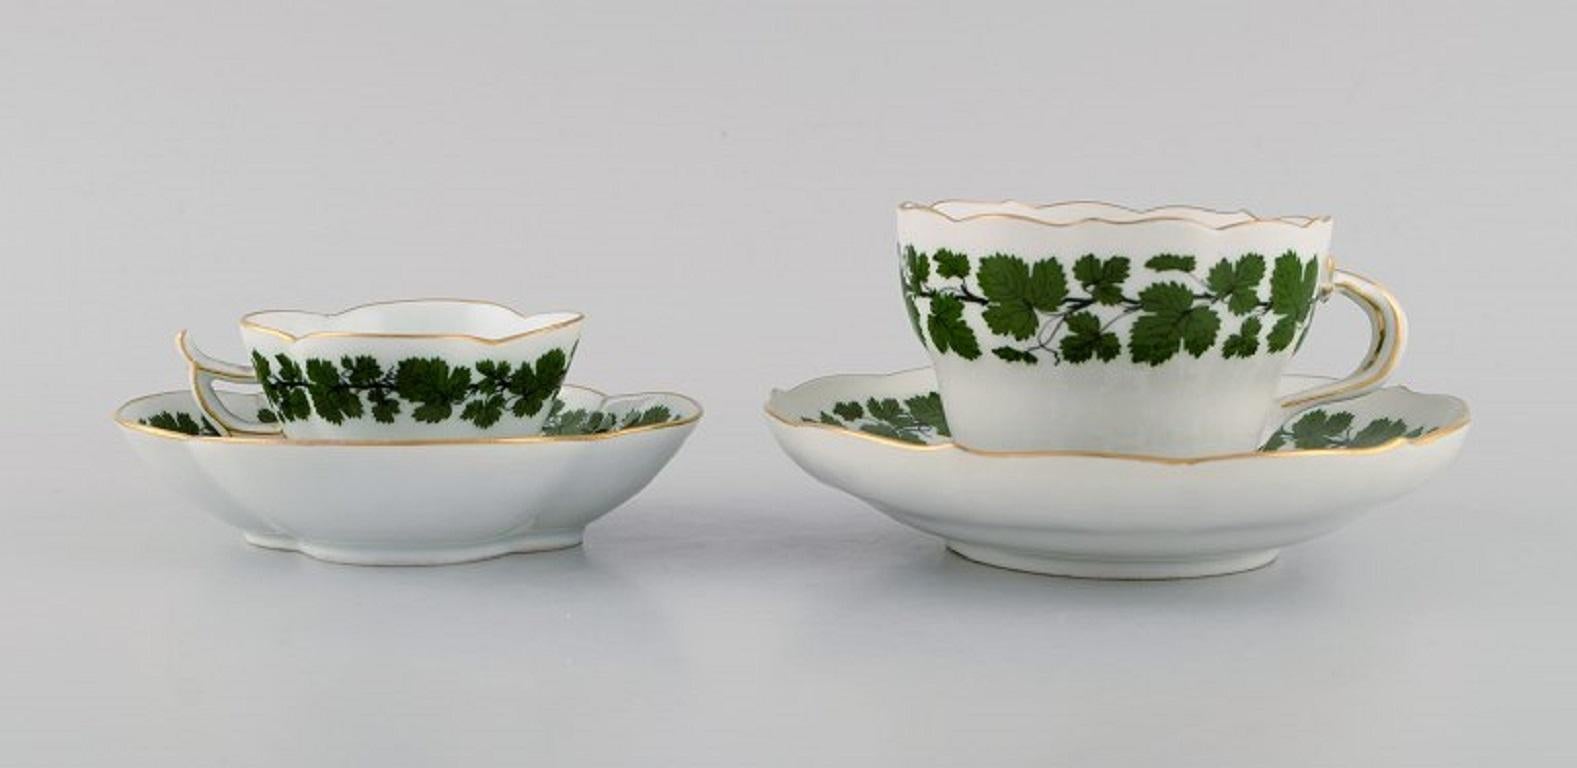 Meissen Green Ivy Vine Leaf mocha and tea cup in hand-painted porcelain with gold edge. 
1920s / 30s.
The teacup measures: 9 x 6.5 cm.
Saucer diameter: 14.8 cm.
The mocha cup measures: 7 x 4.5 cm.
Saucer diameter: 12.3 cm.
In excellent